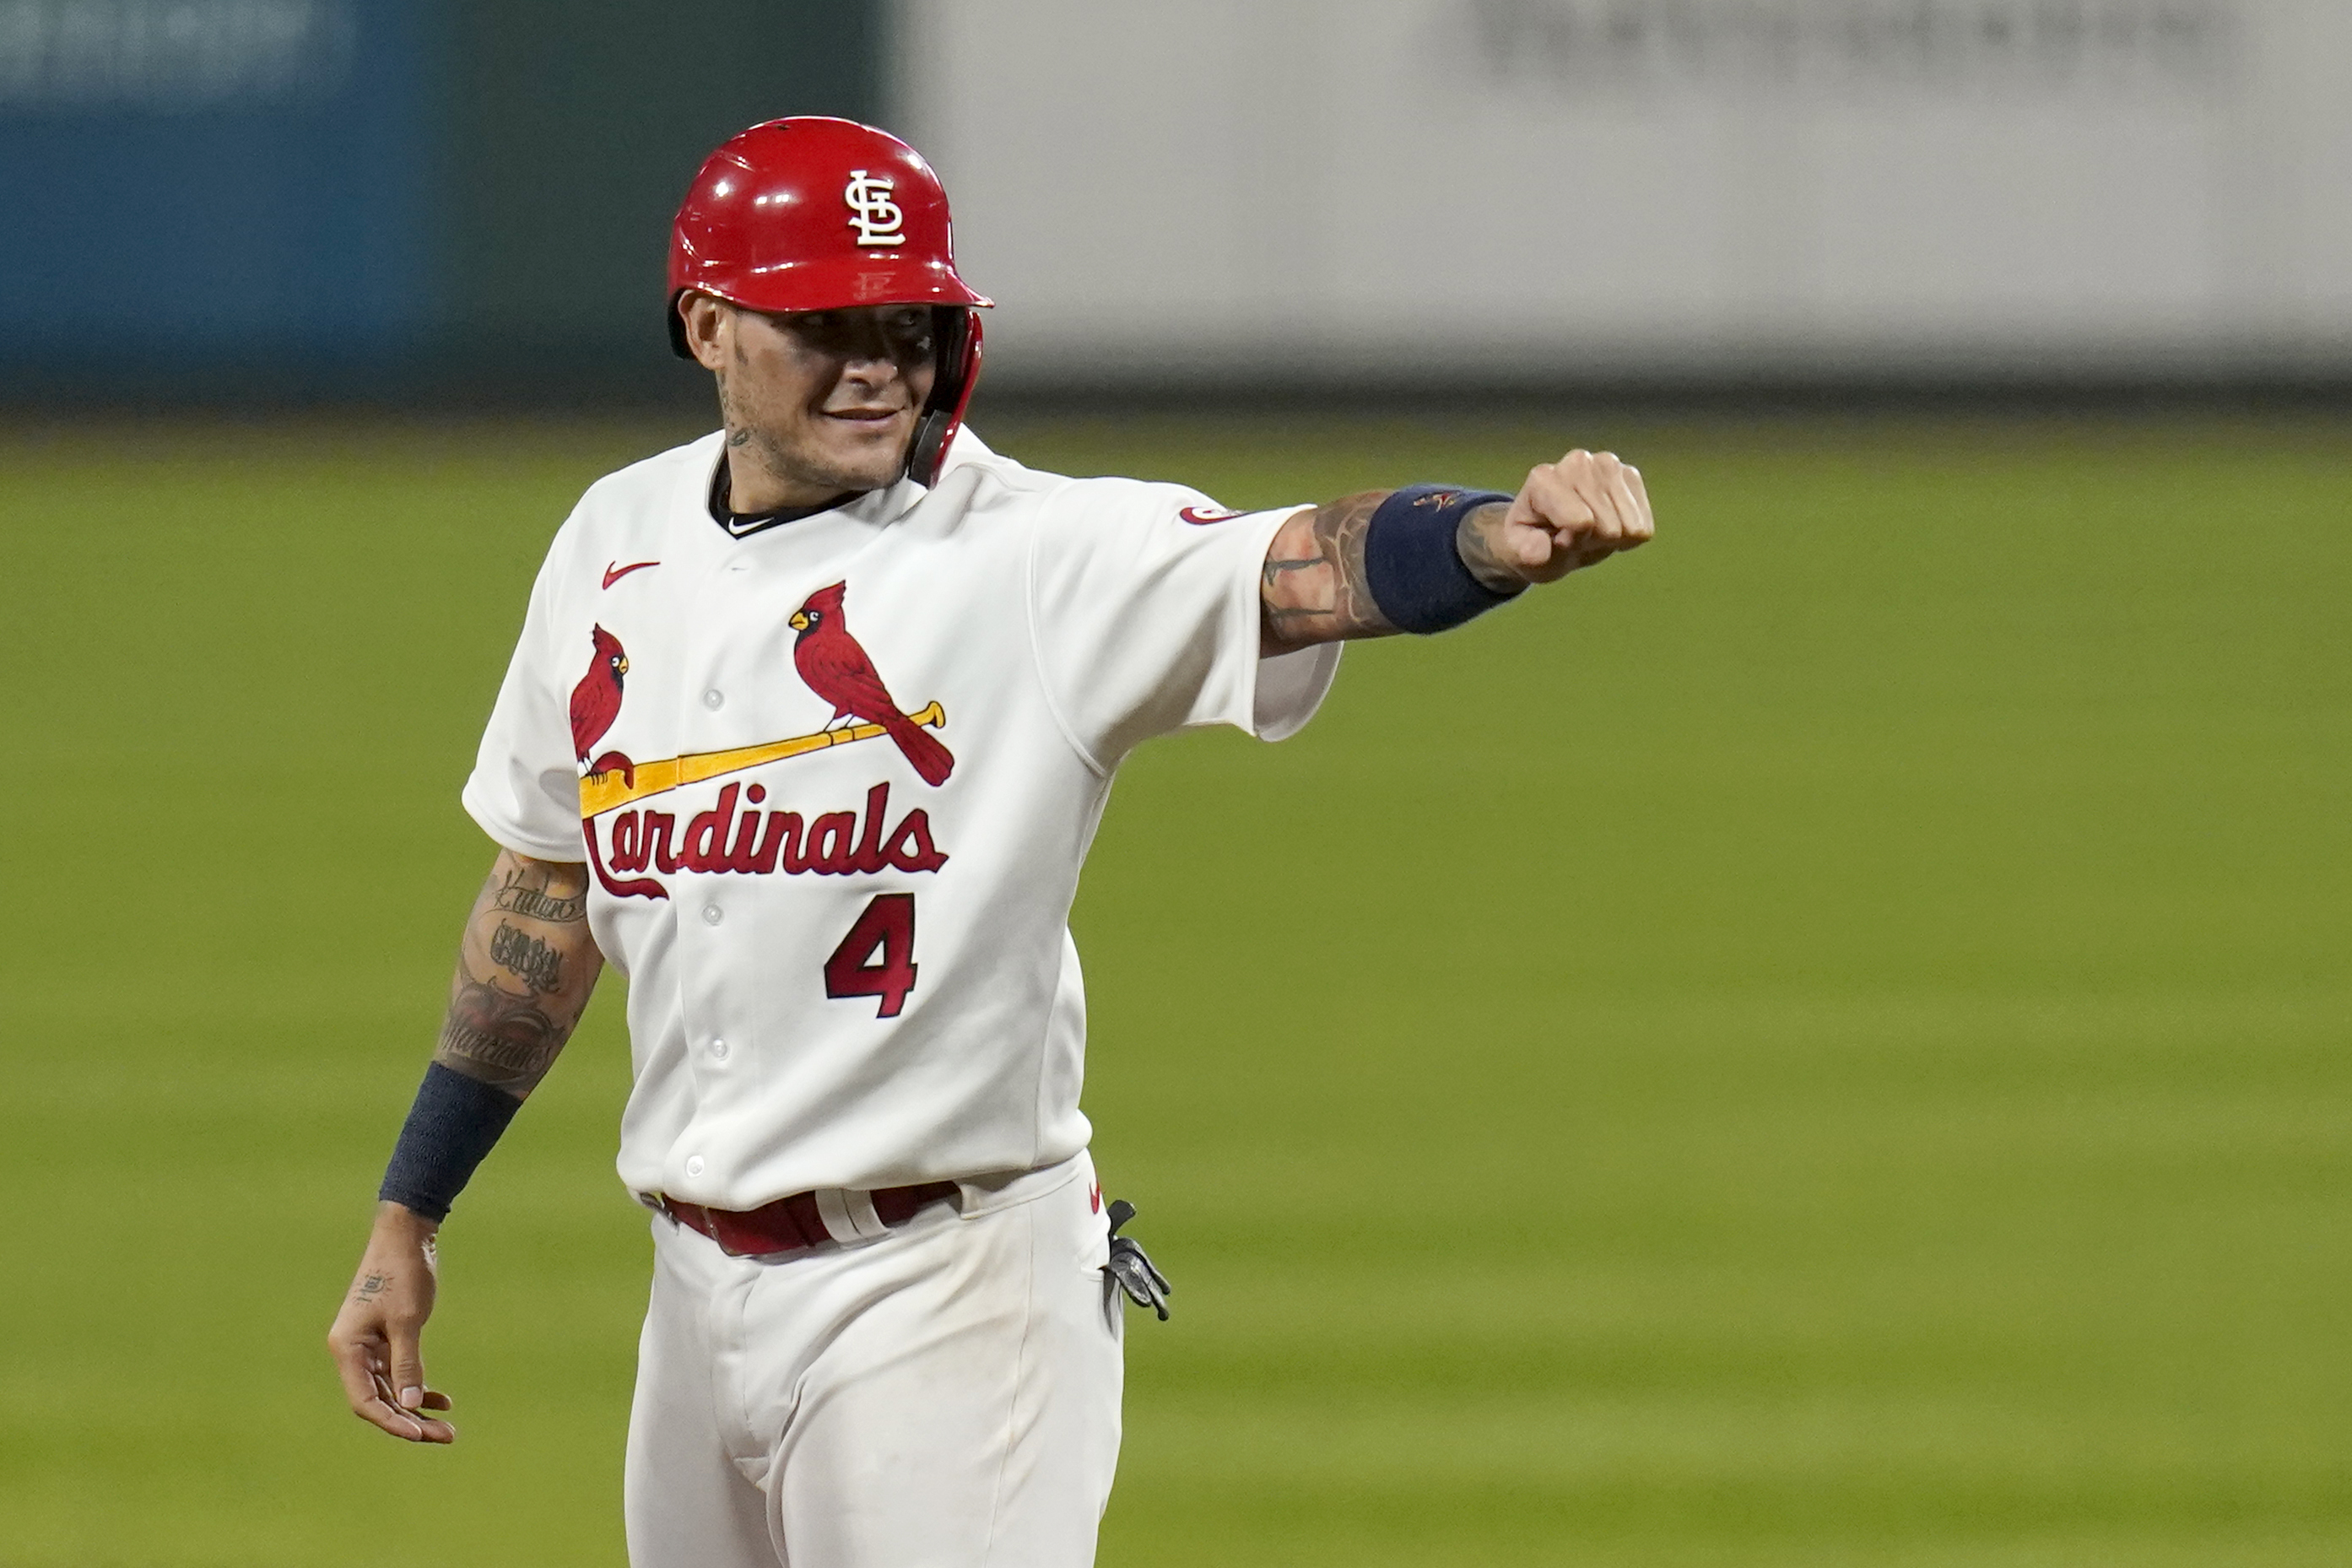 REPORTS: Yadier Molina returning to the Cardinals on a one-year contract